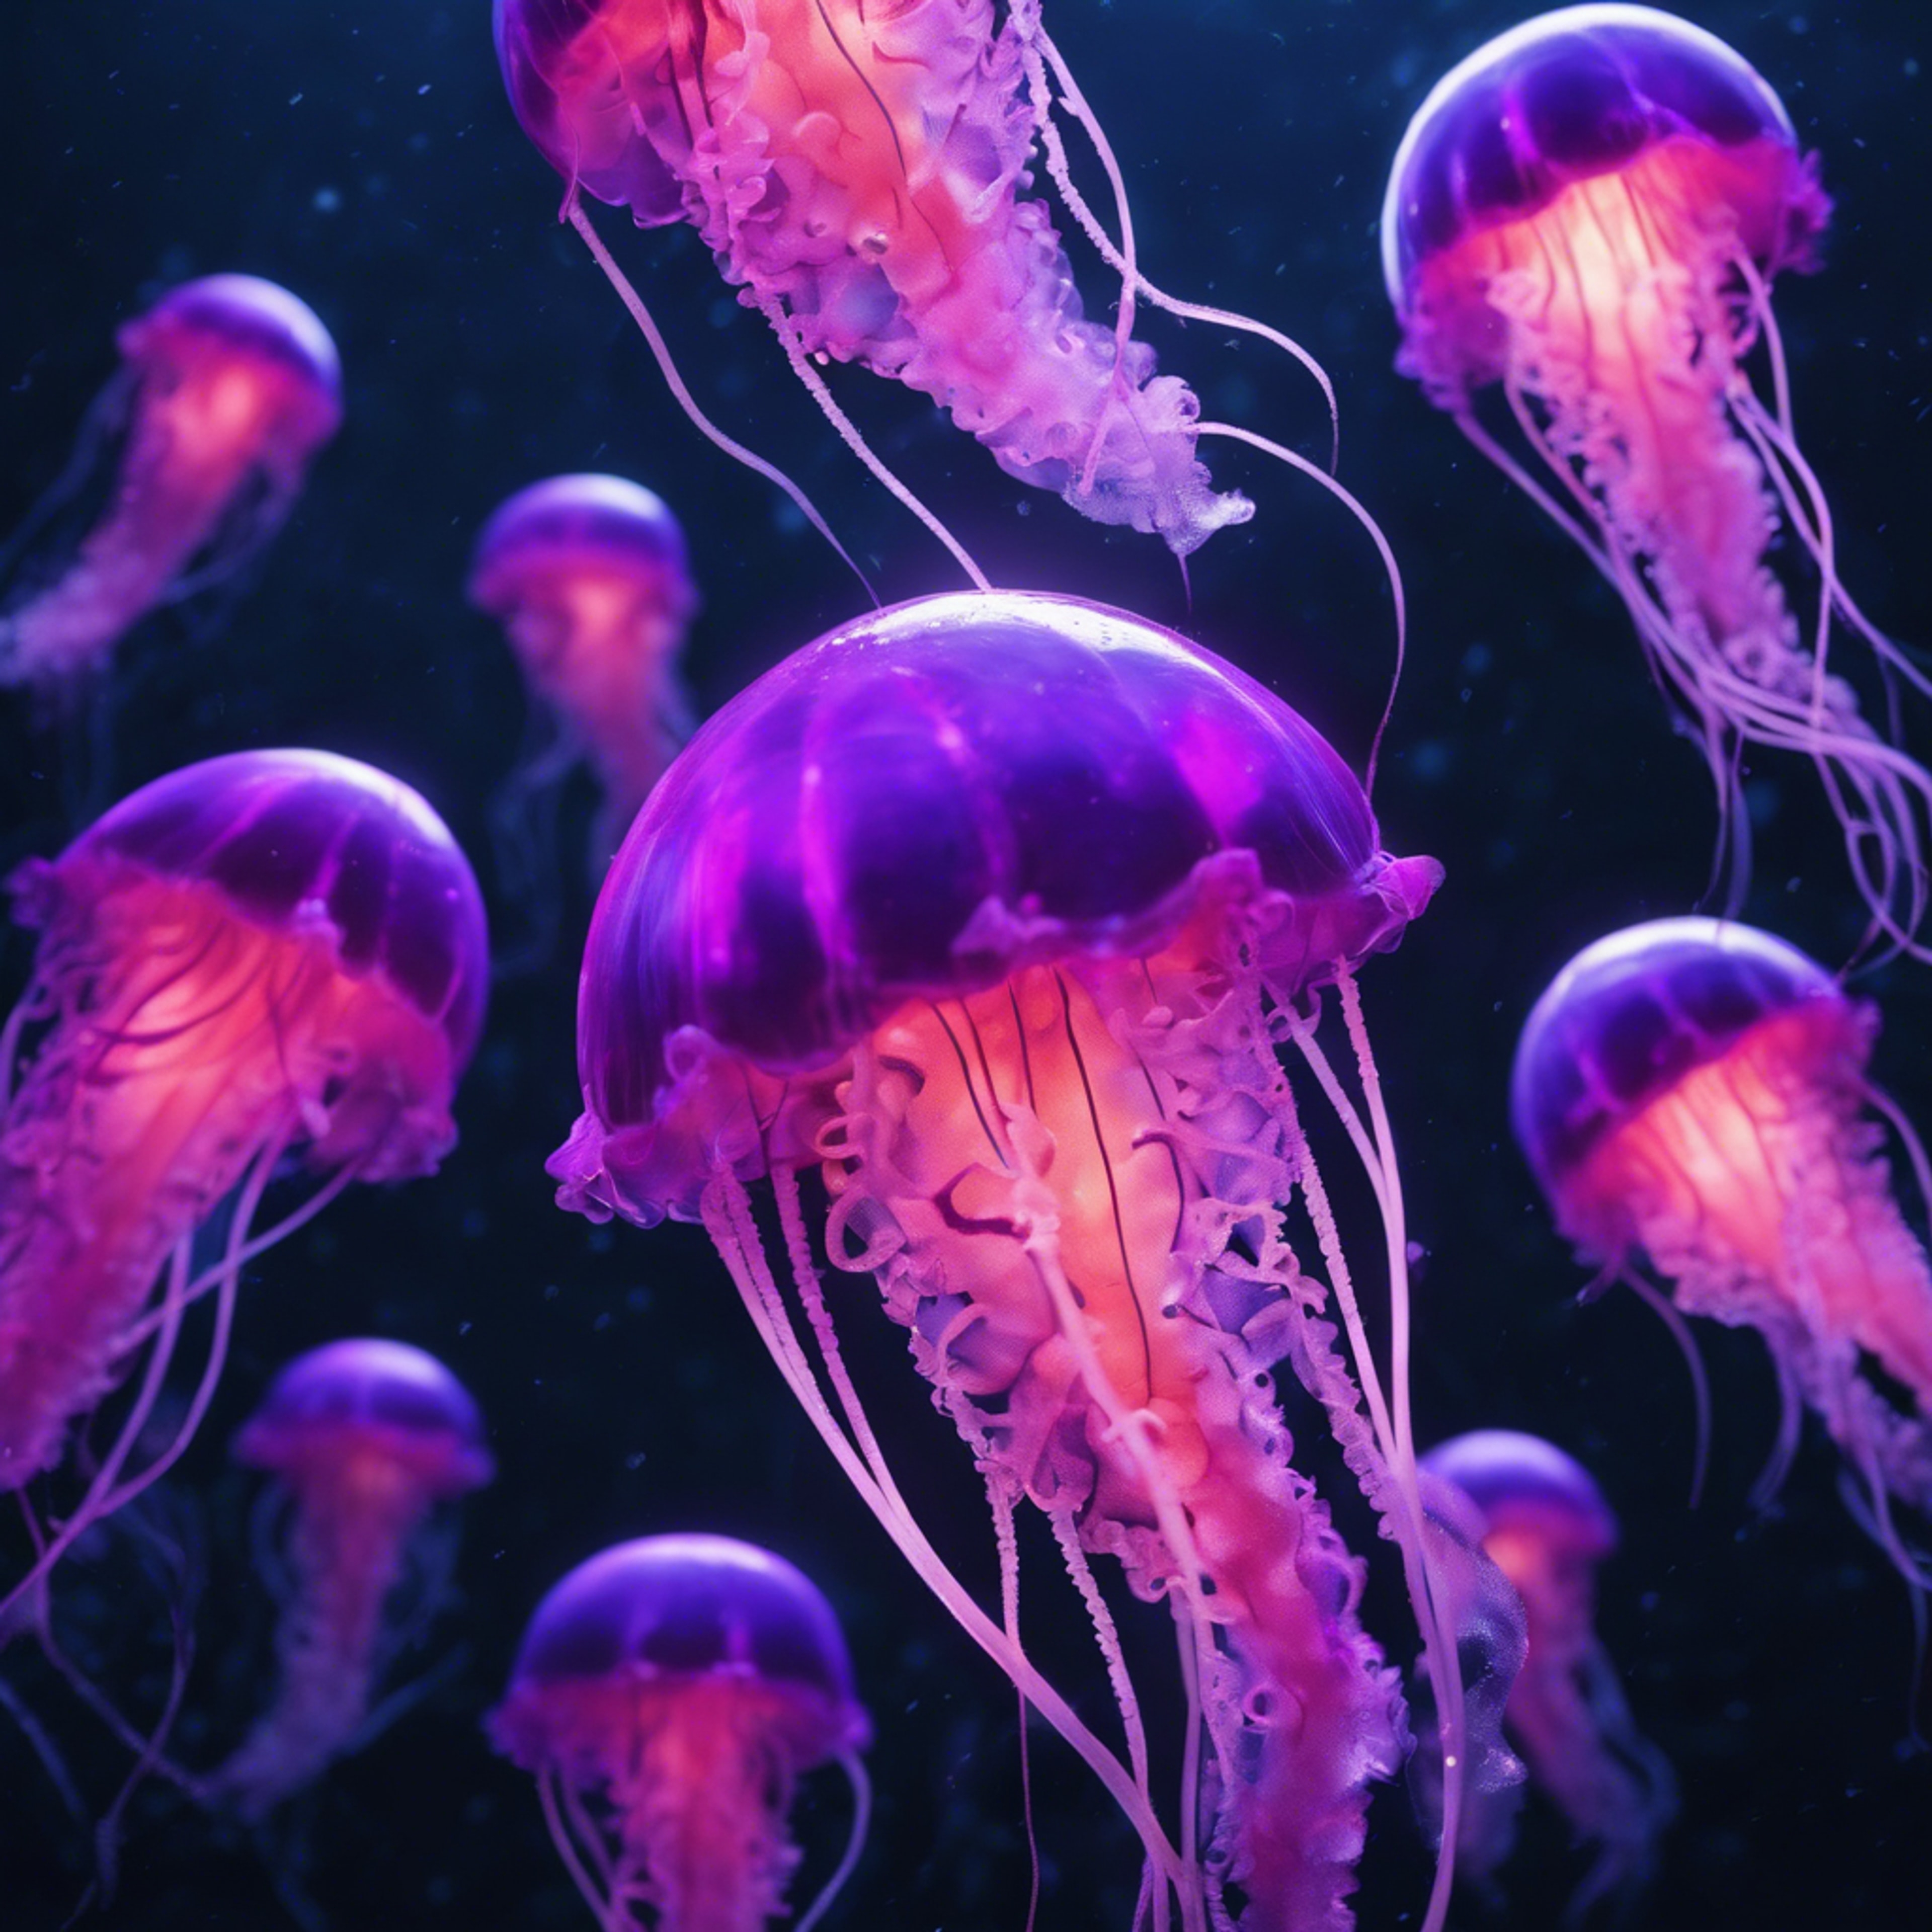 An array of neon purple jellyfish gracefully floating in the cool, dark depths of the ocean.壁紙[2e15e39636af455f837d]